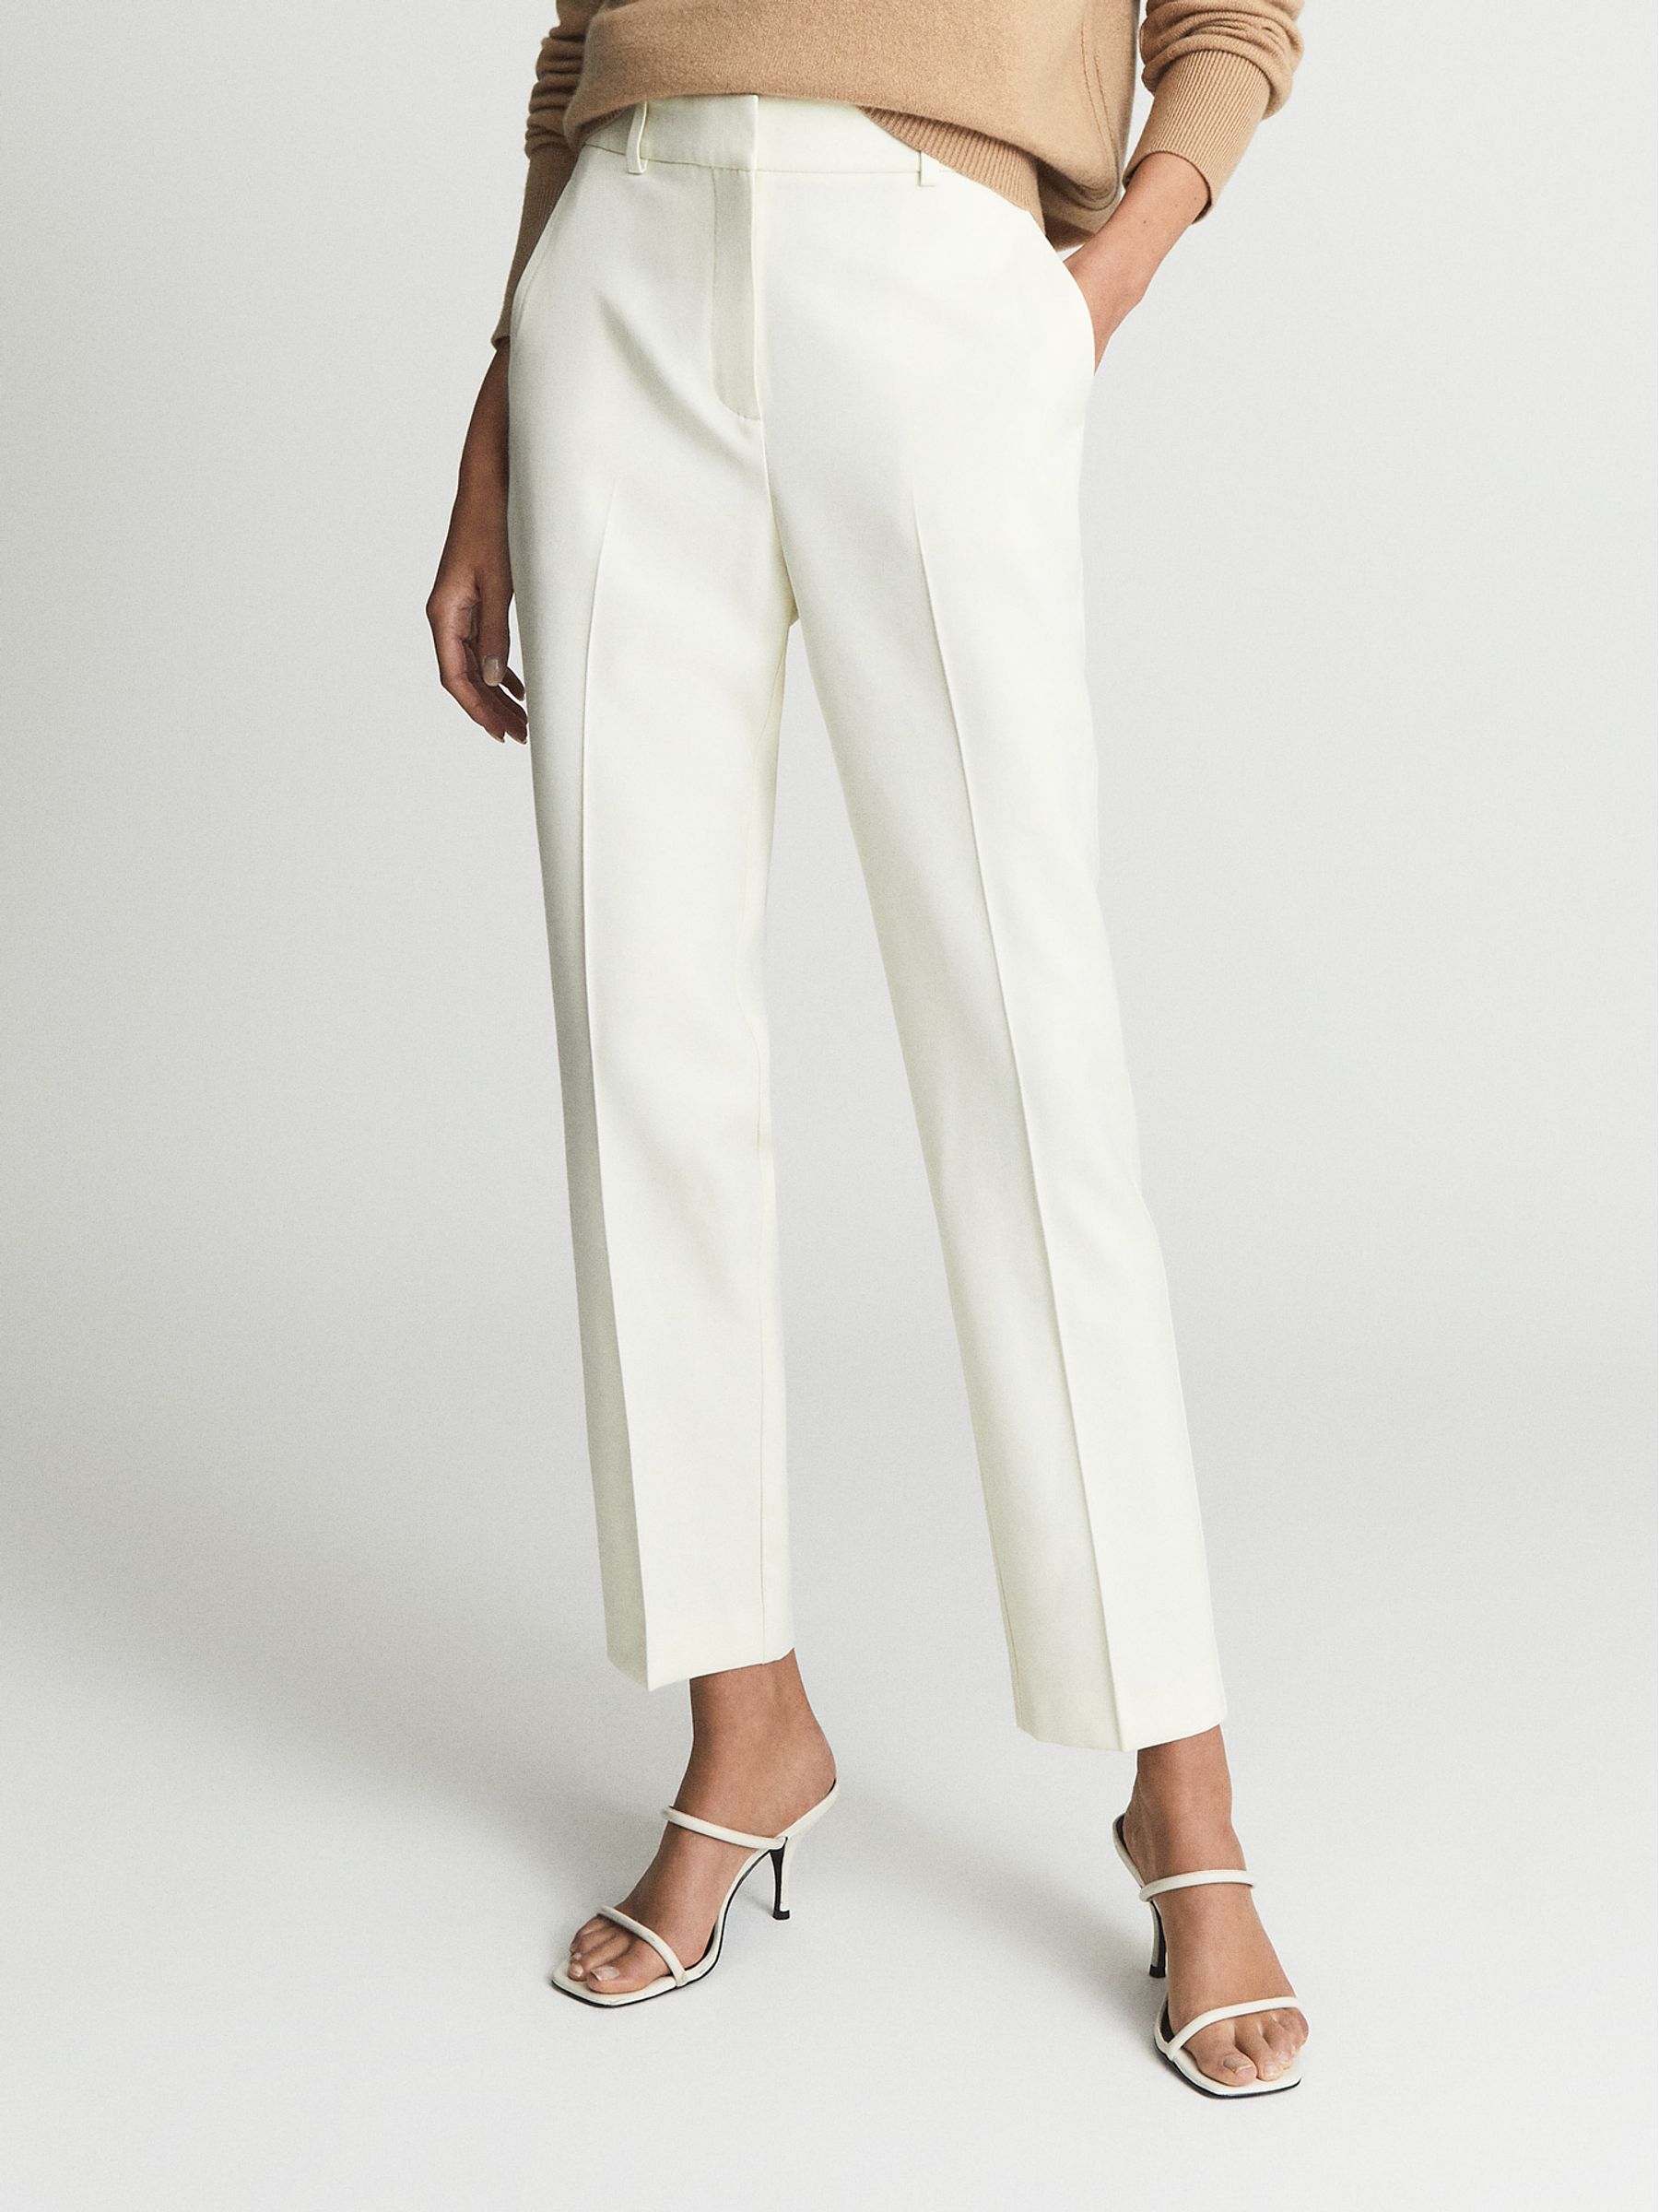 Reiss Etna Flared Tailored Trousers - REISS